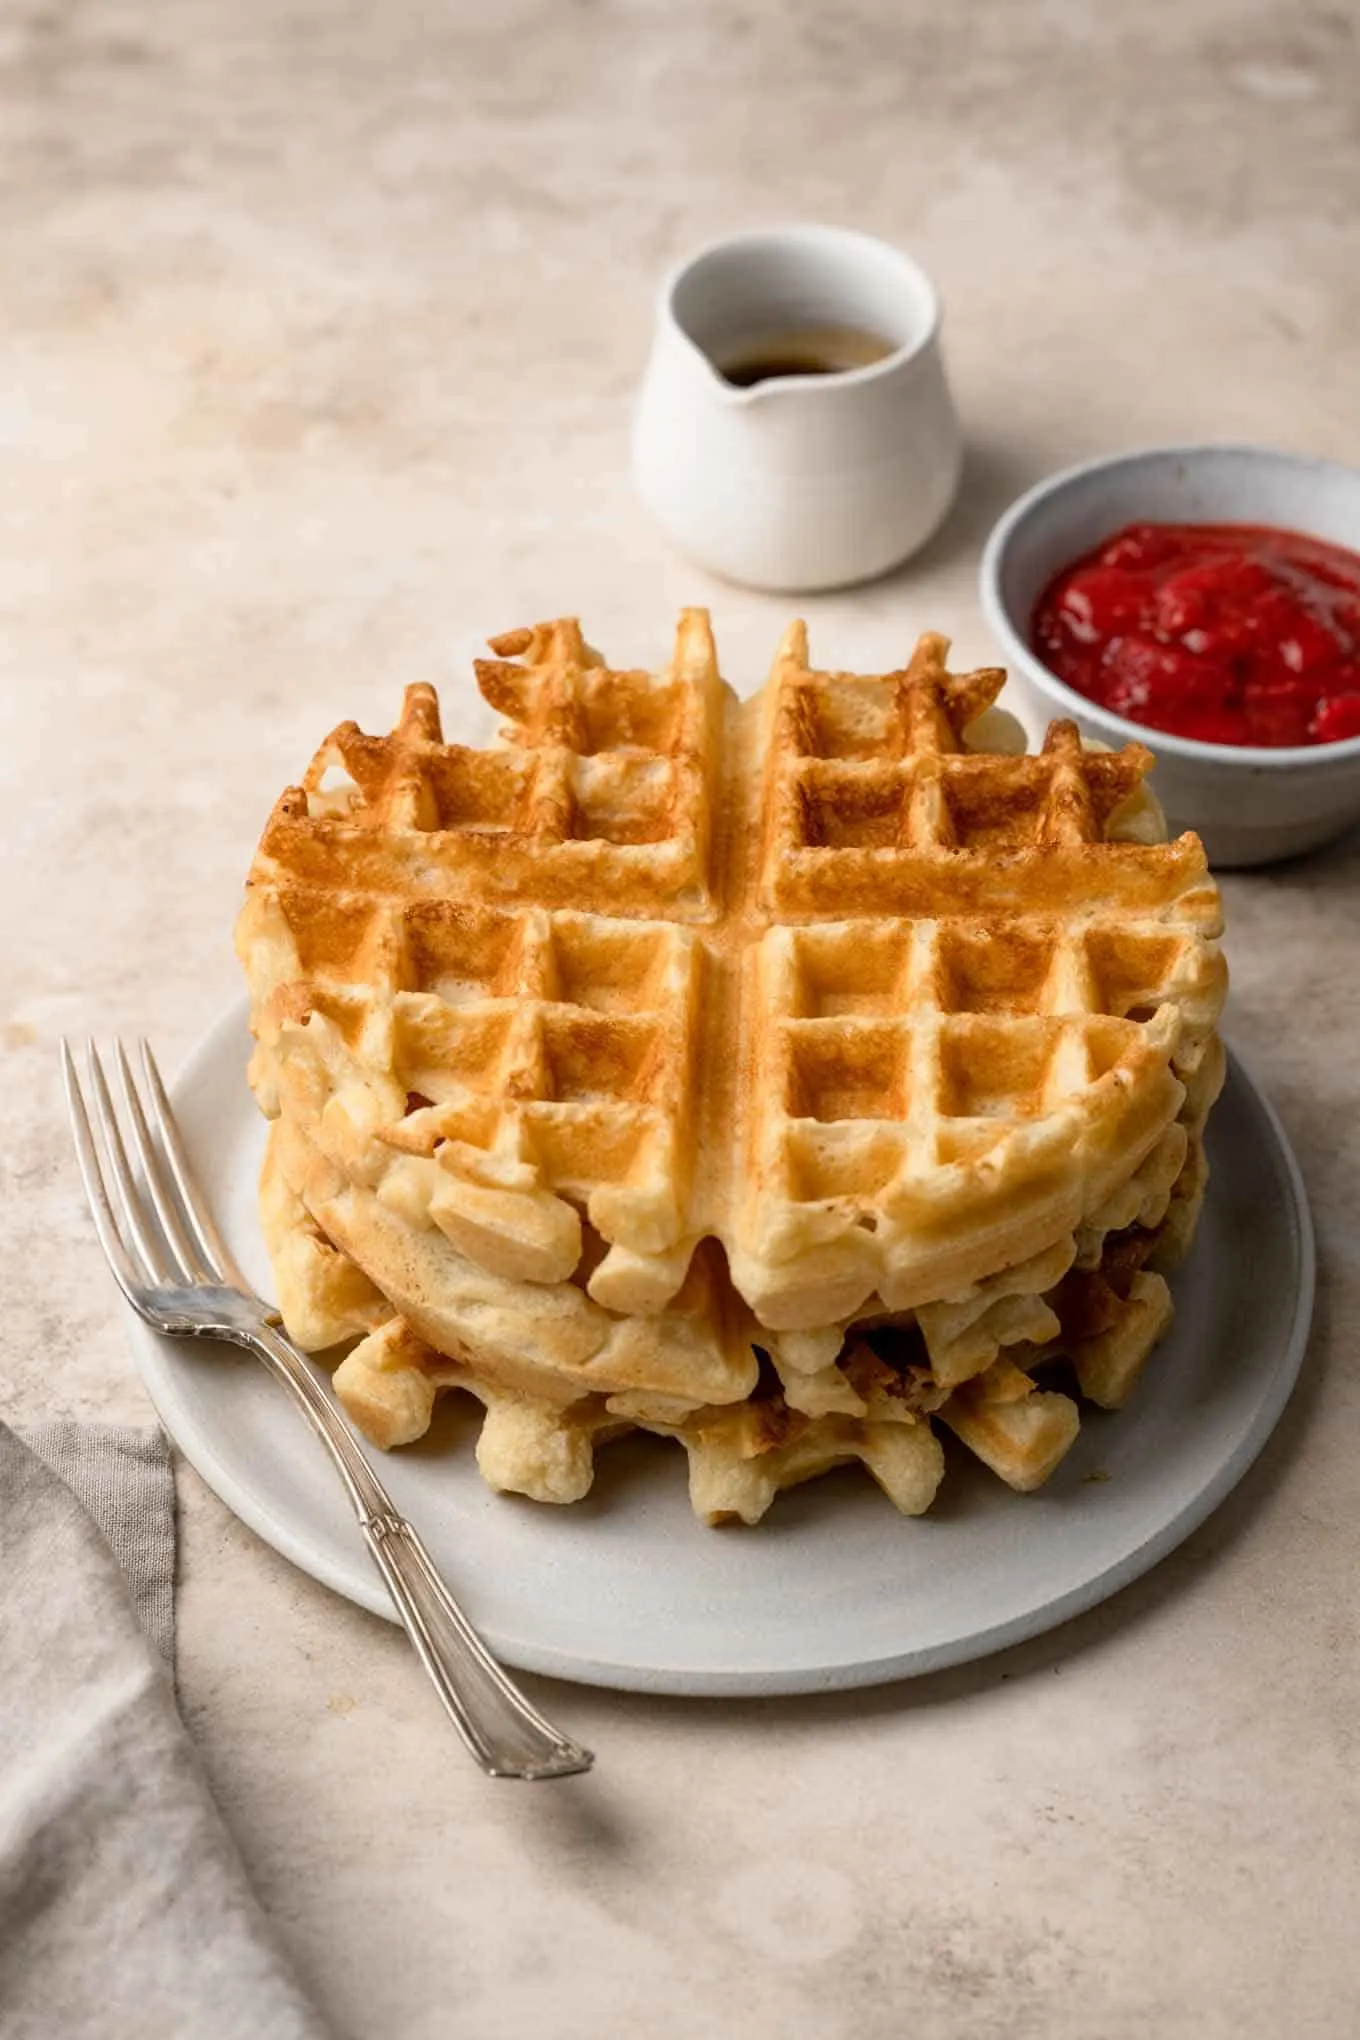 Three waffles stacked on a plate with a jug of maple syrup and fruit compote to serve